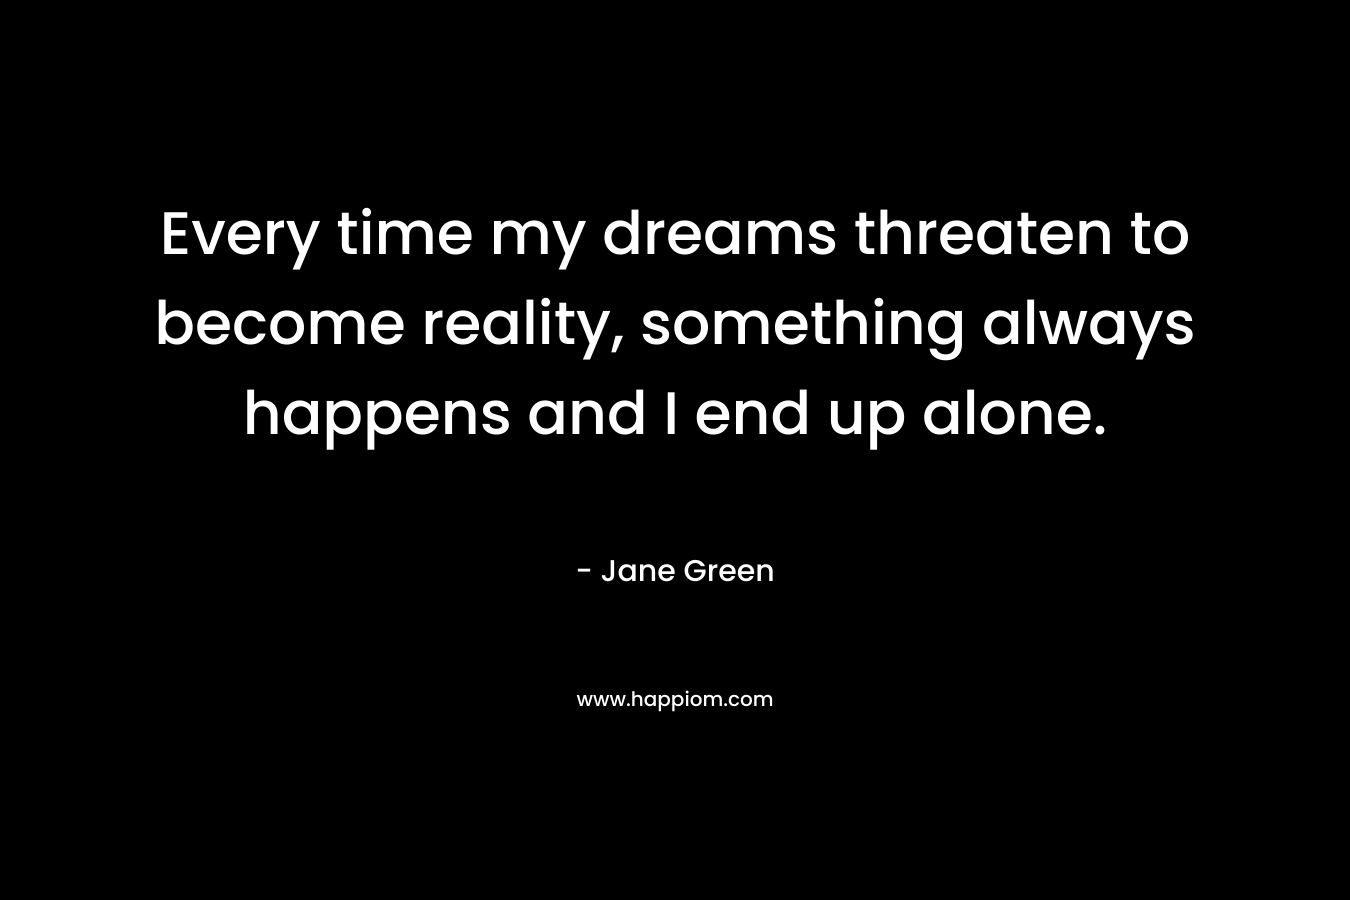 Every time my dreams threaten to become reality, something always happens and I end up alone.